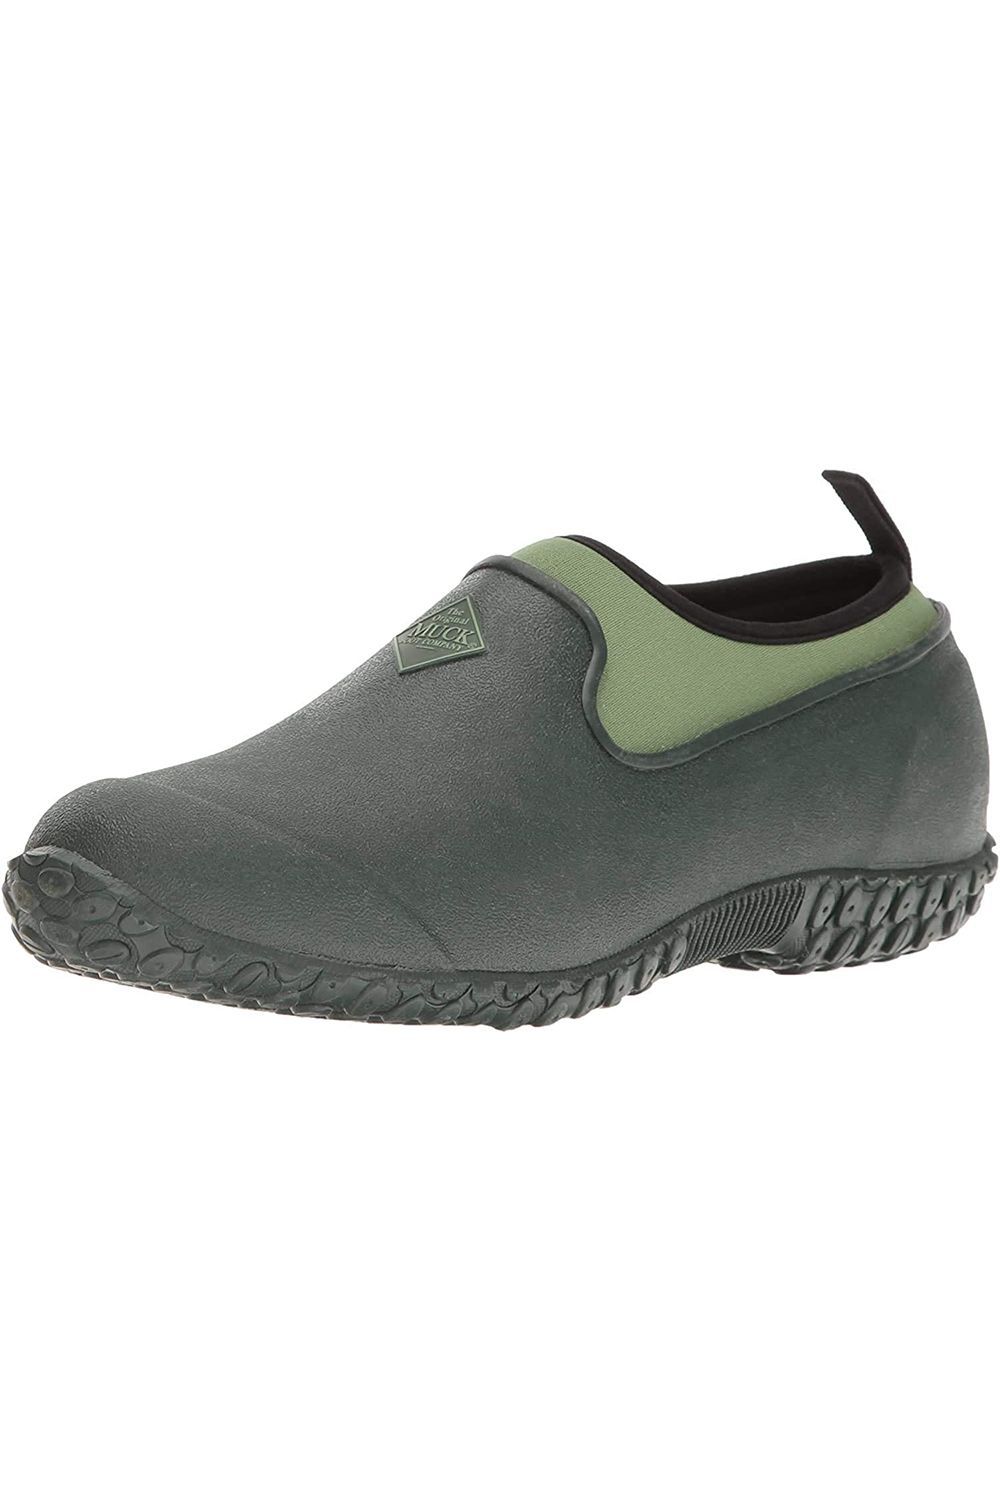 best garden shoes with arch support